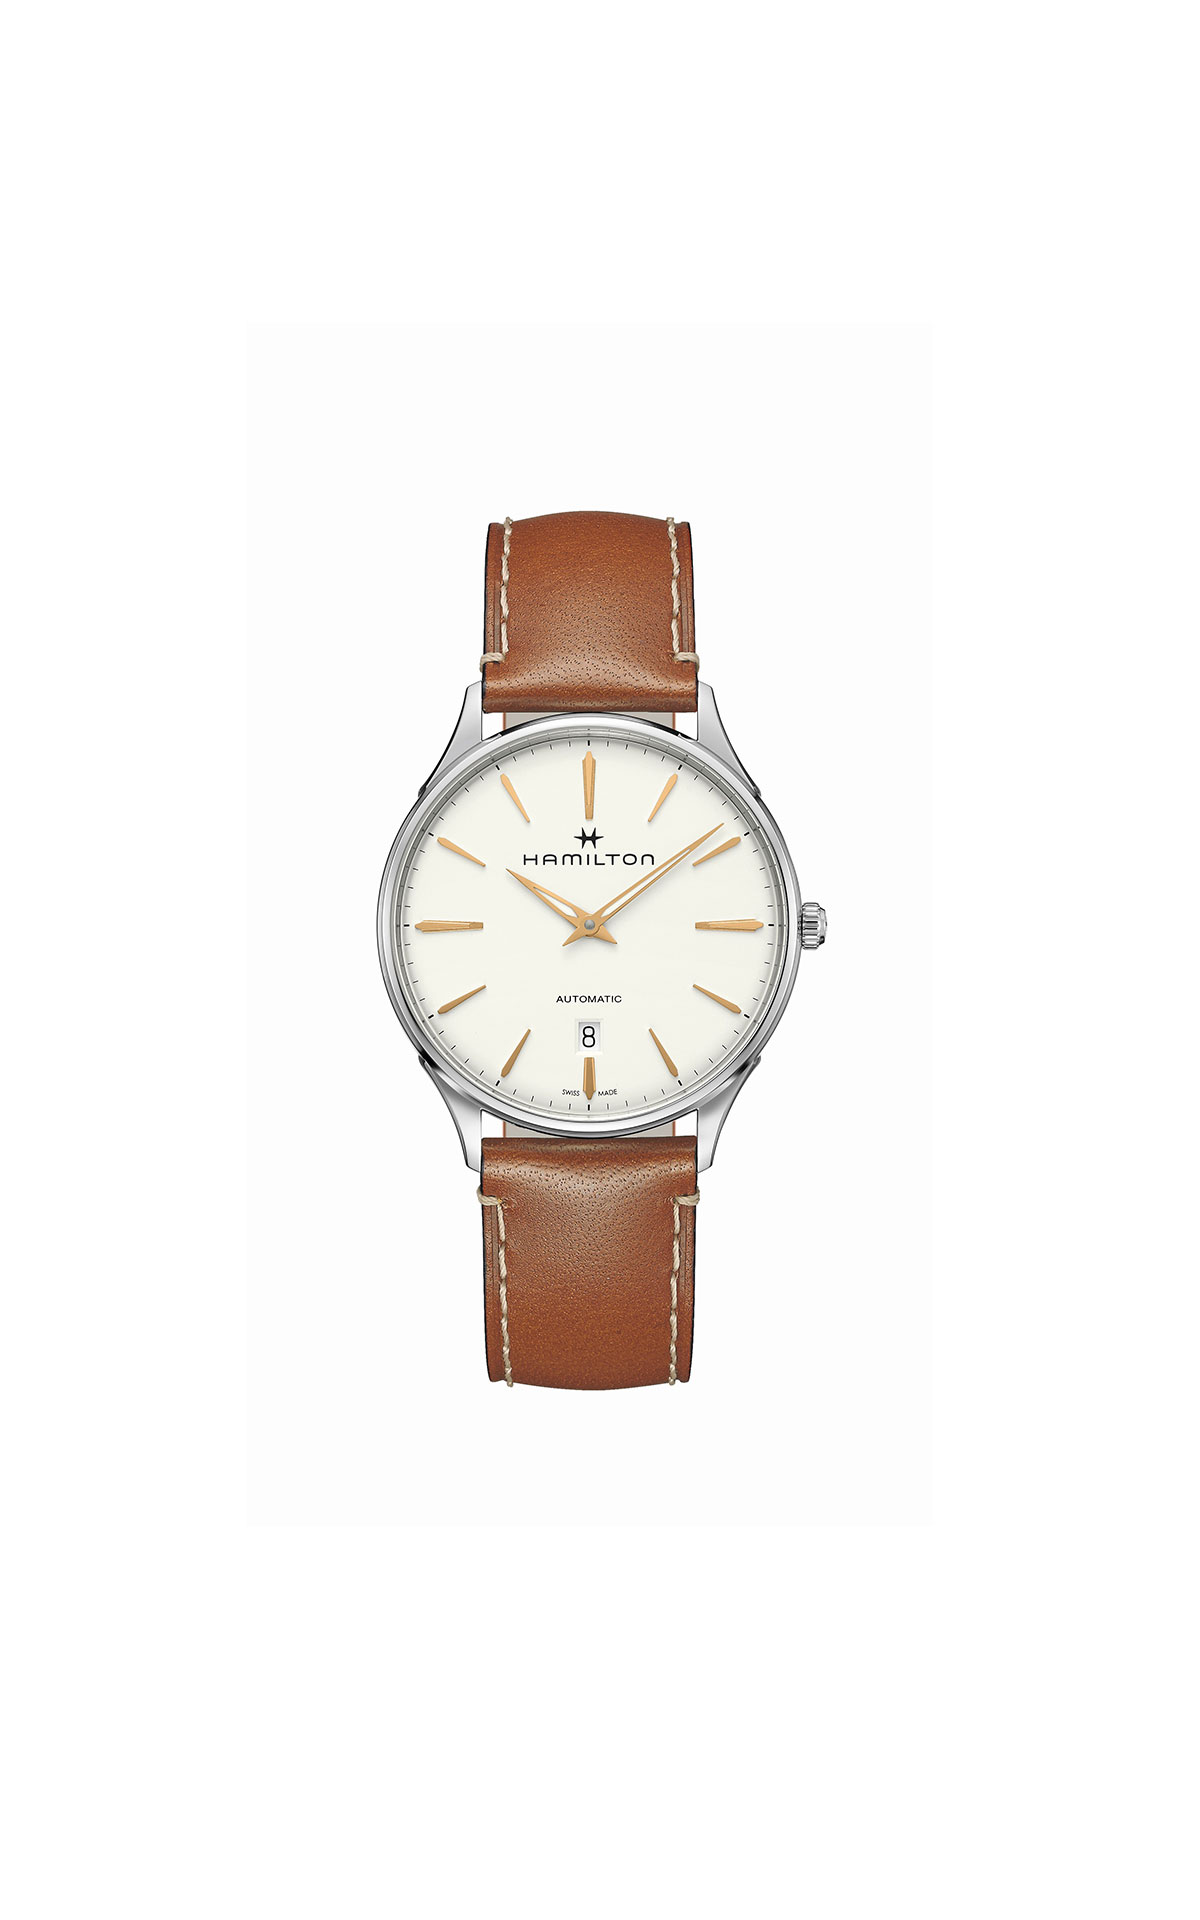 Hour Passion Jazzmaster Thinline white dial brown strap from Bicester Village